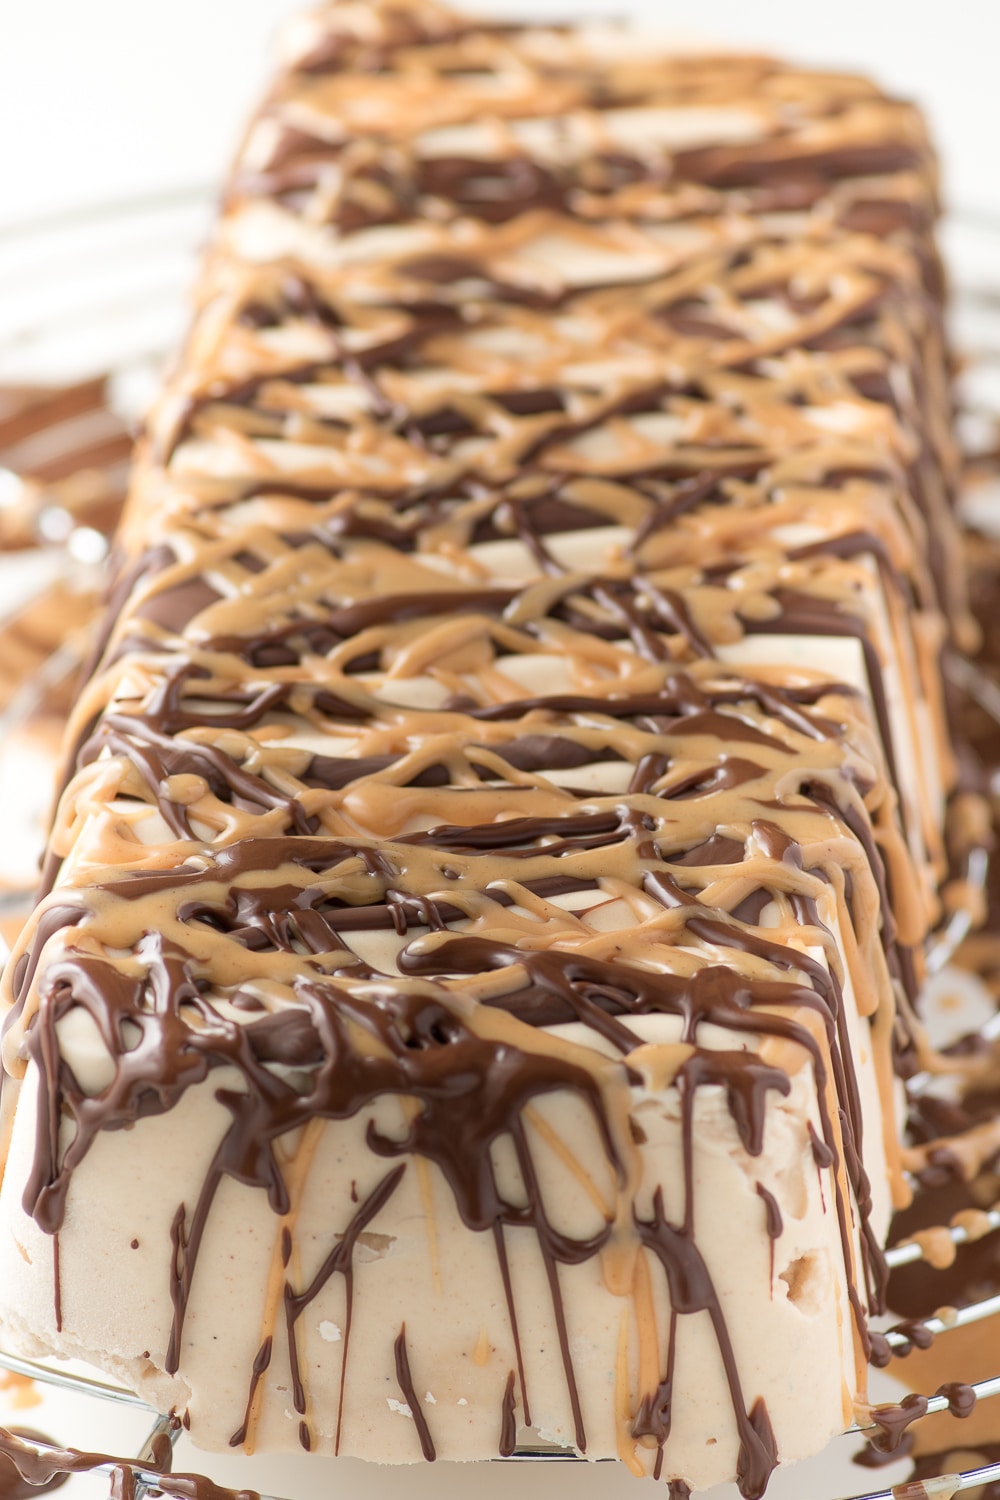 chocolate and peanut butter drizzle over a cold ice cream cake